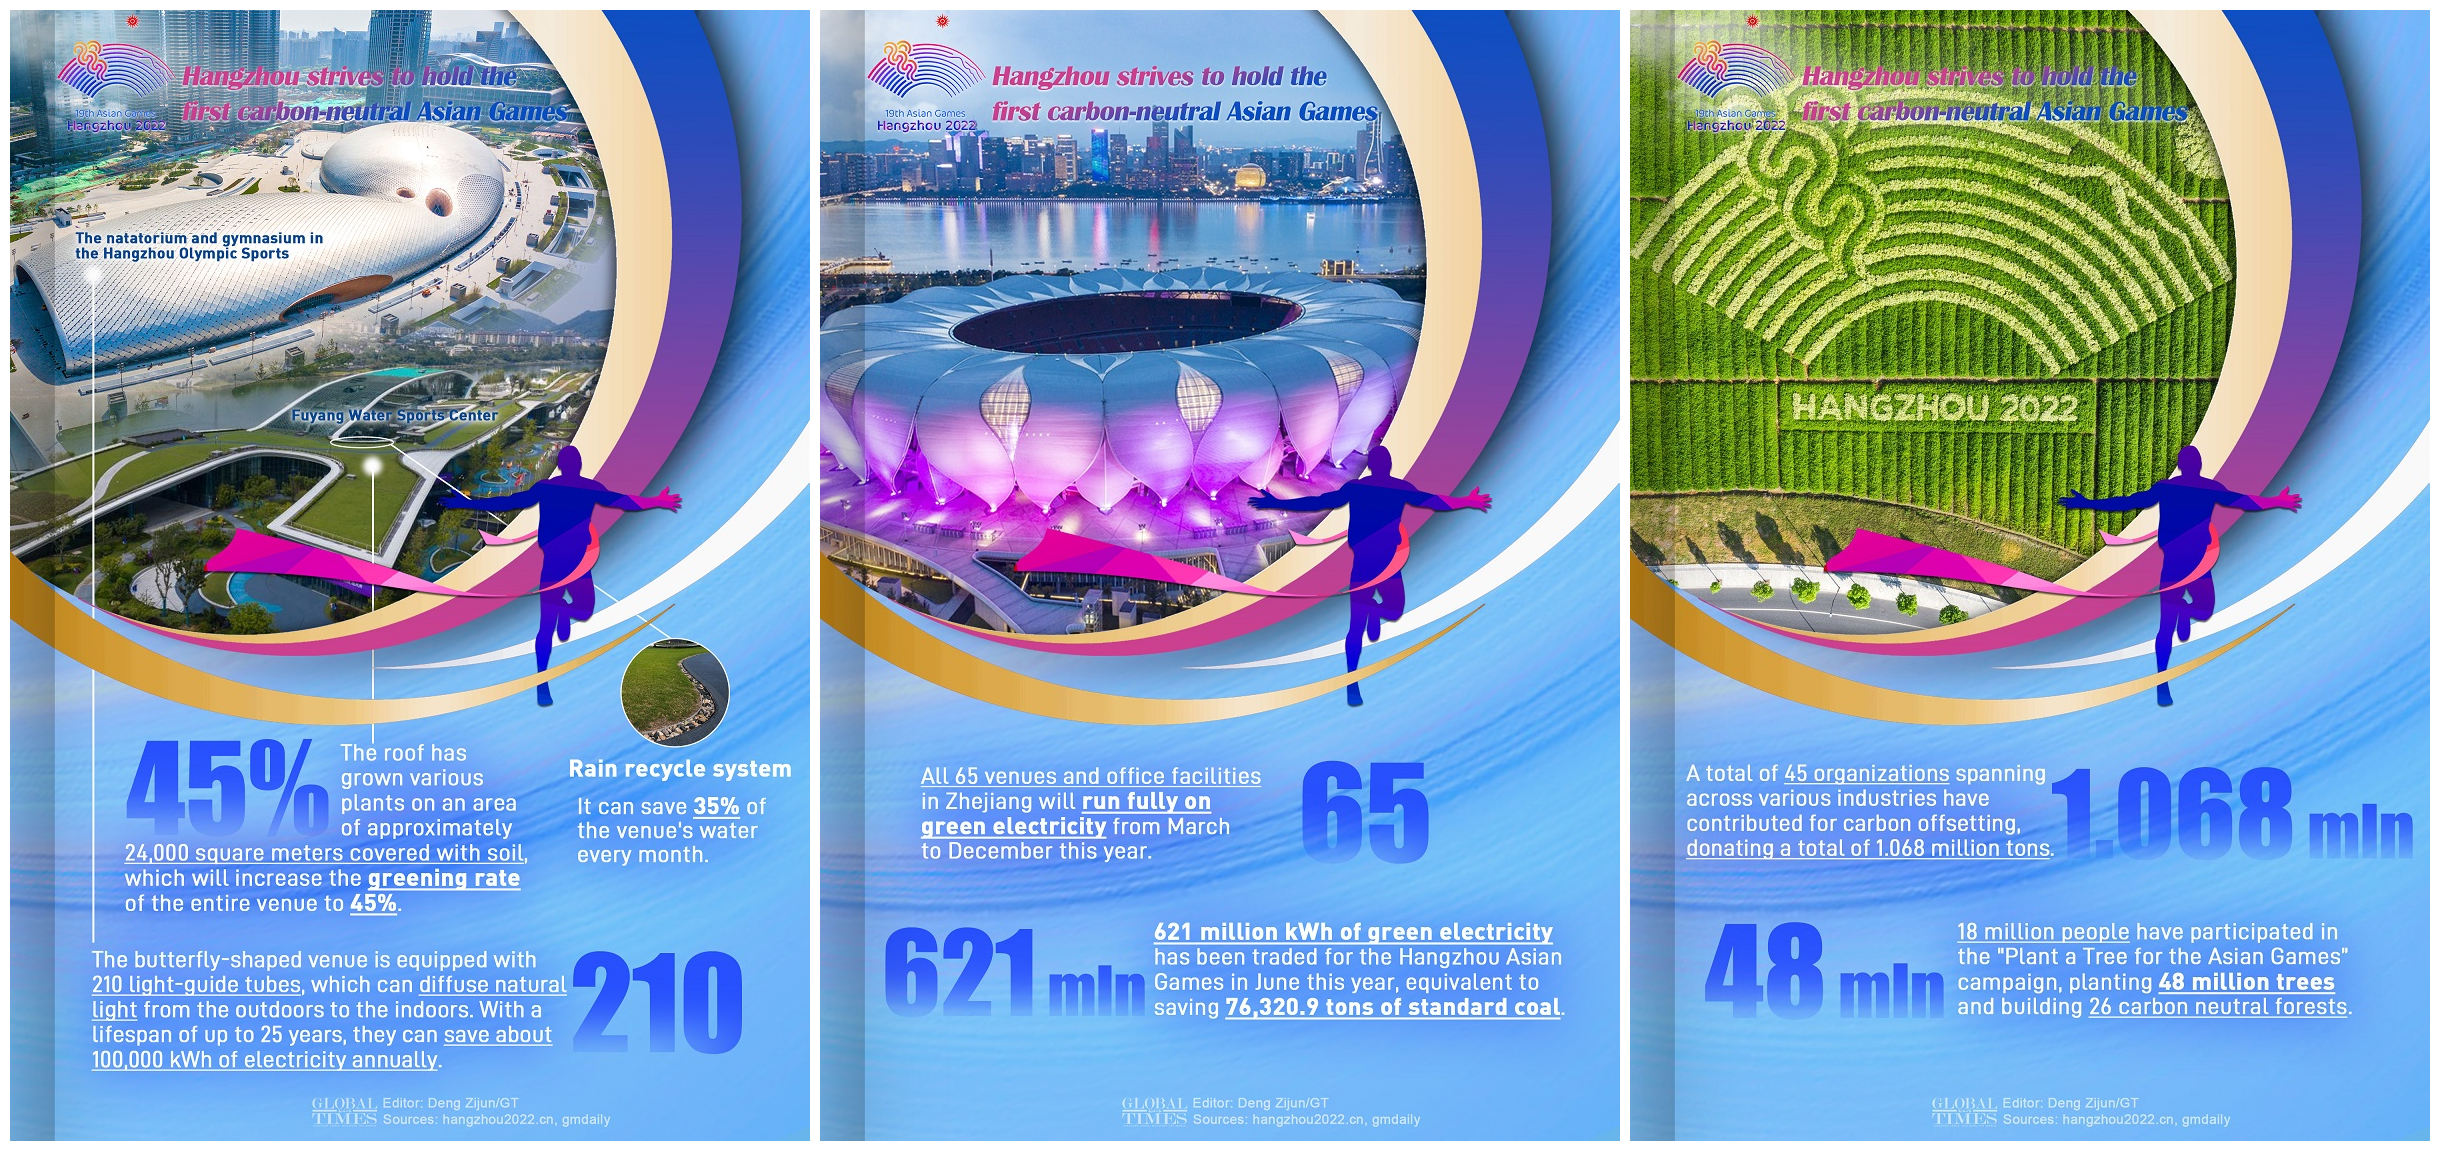 Hangzhou strives to hold the first carbon-neutral Asian Games